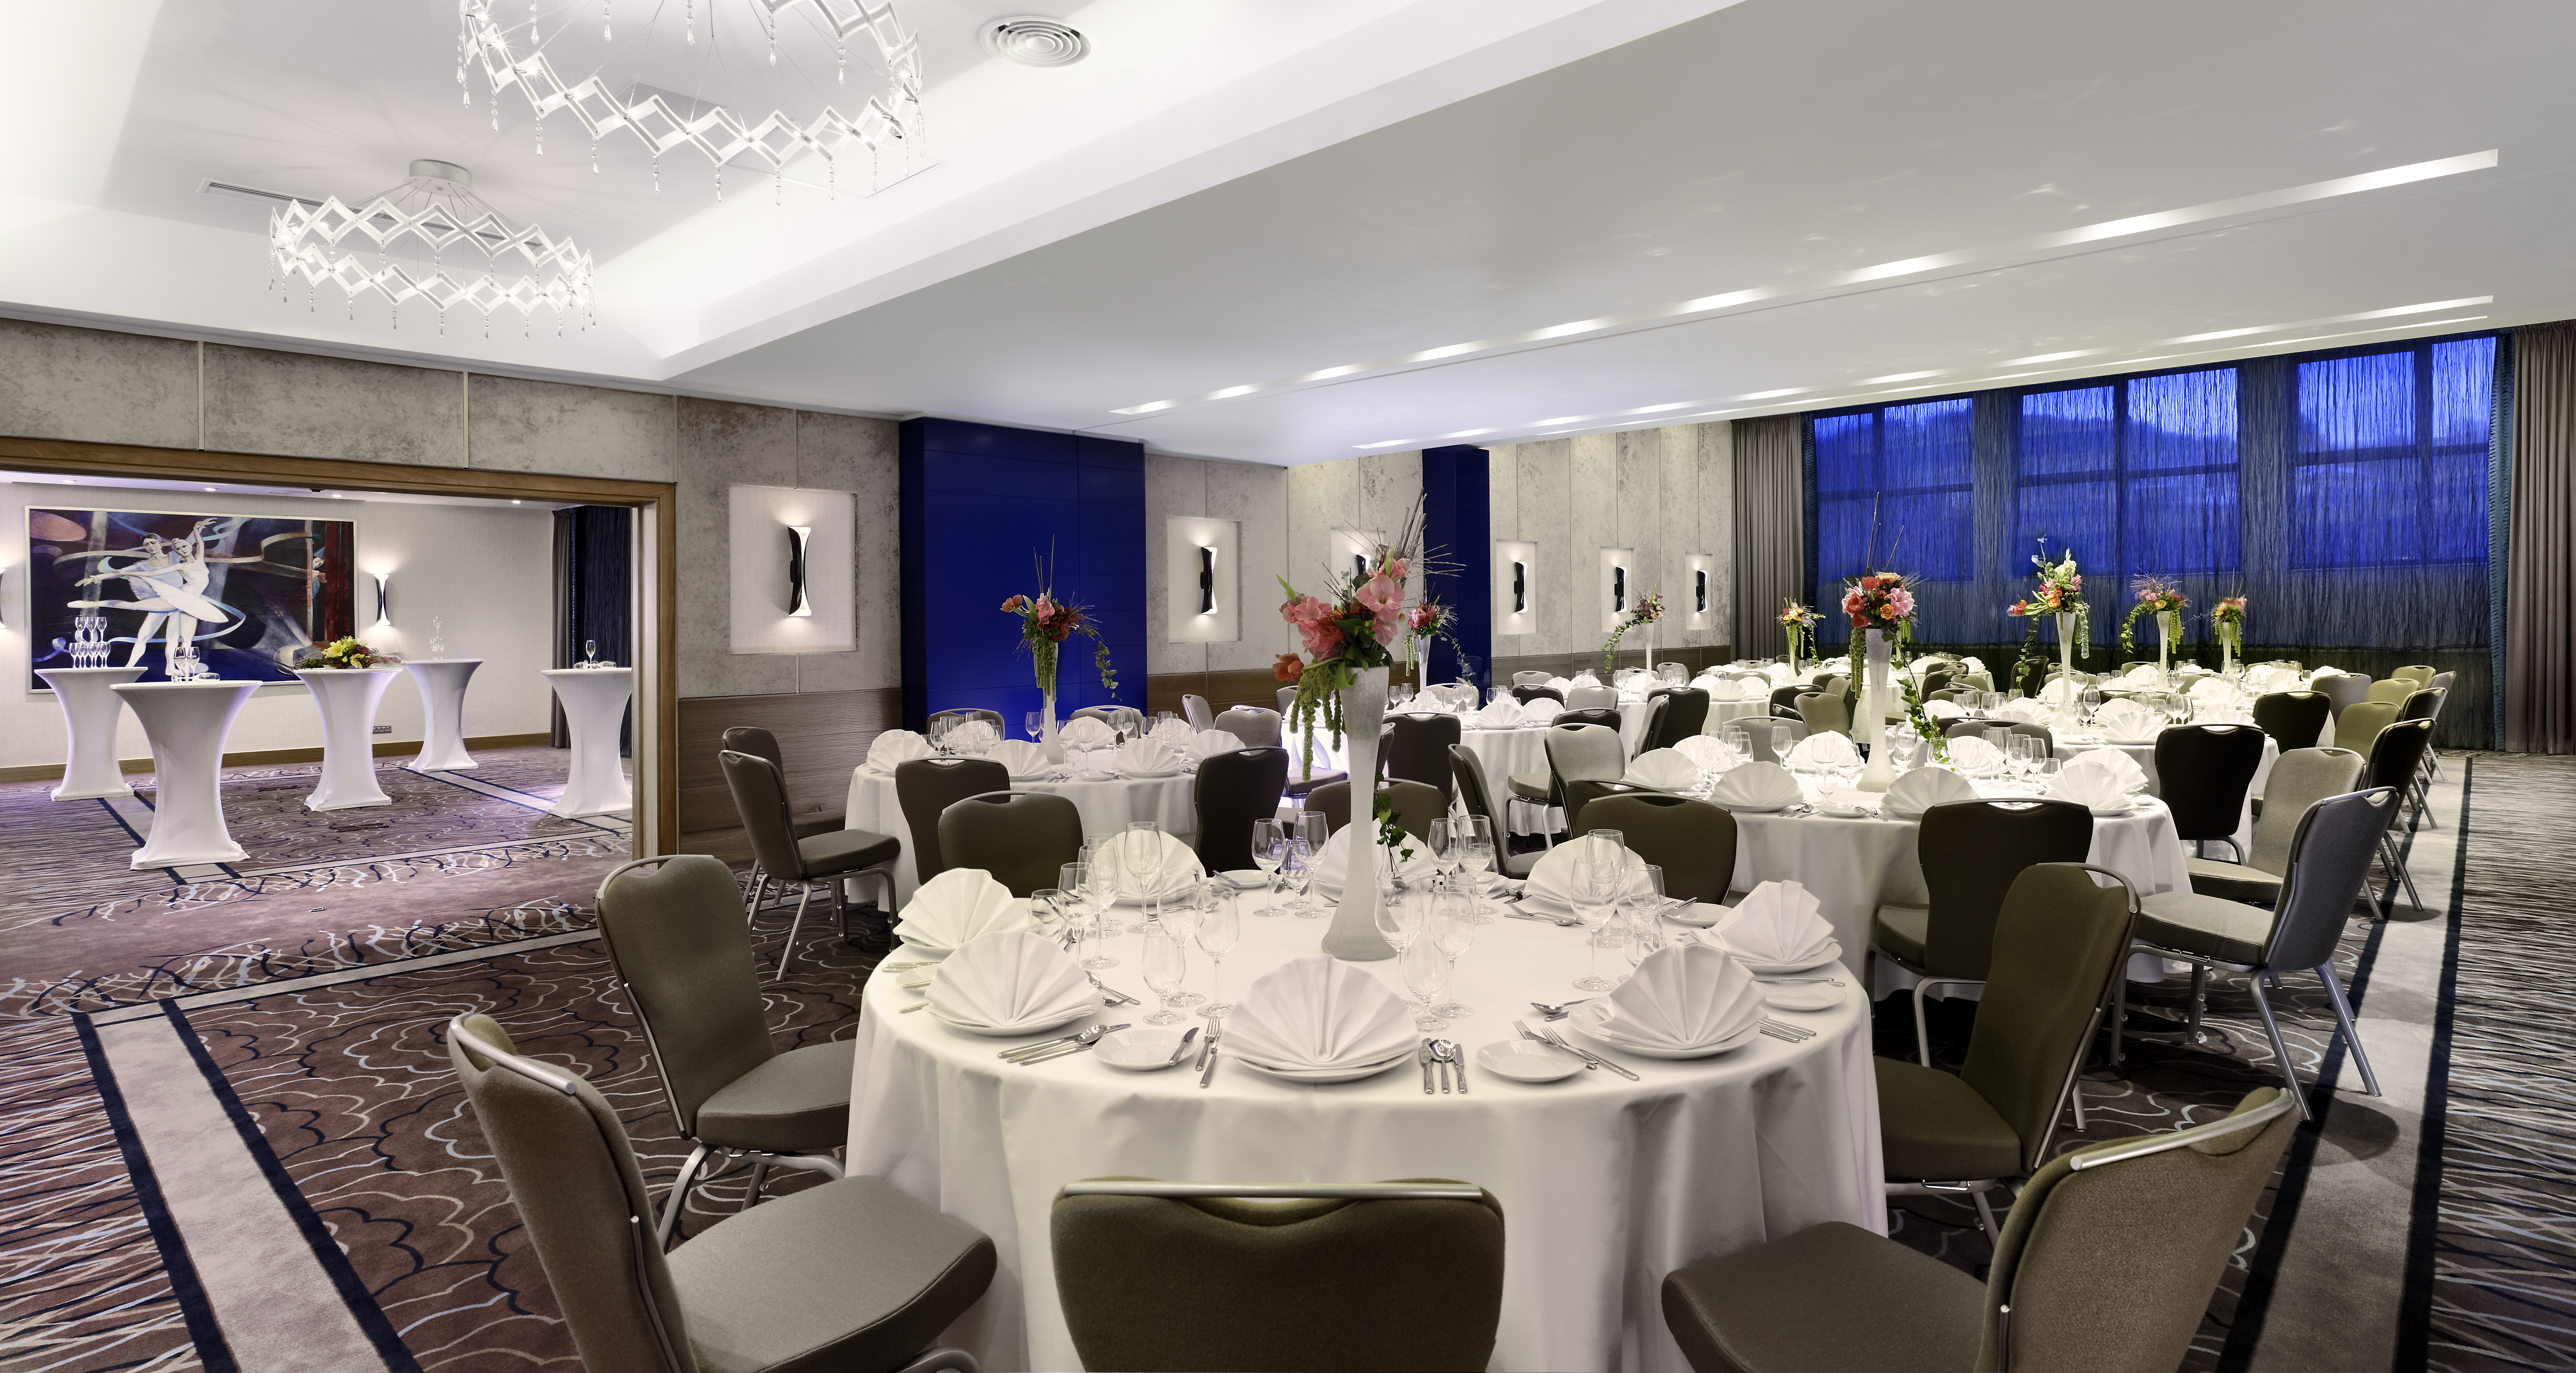 Varadinum Ballroom With With Place Settings, Flowers and White Linens on Round Tables, Chairs, Windows With Sheer Drapes, and View of Cocktail Tables and Wall Art in Breakout Room